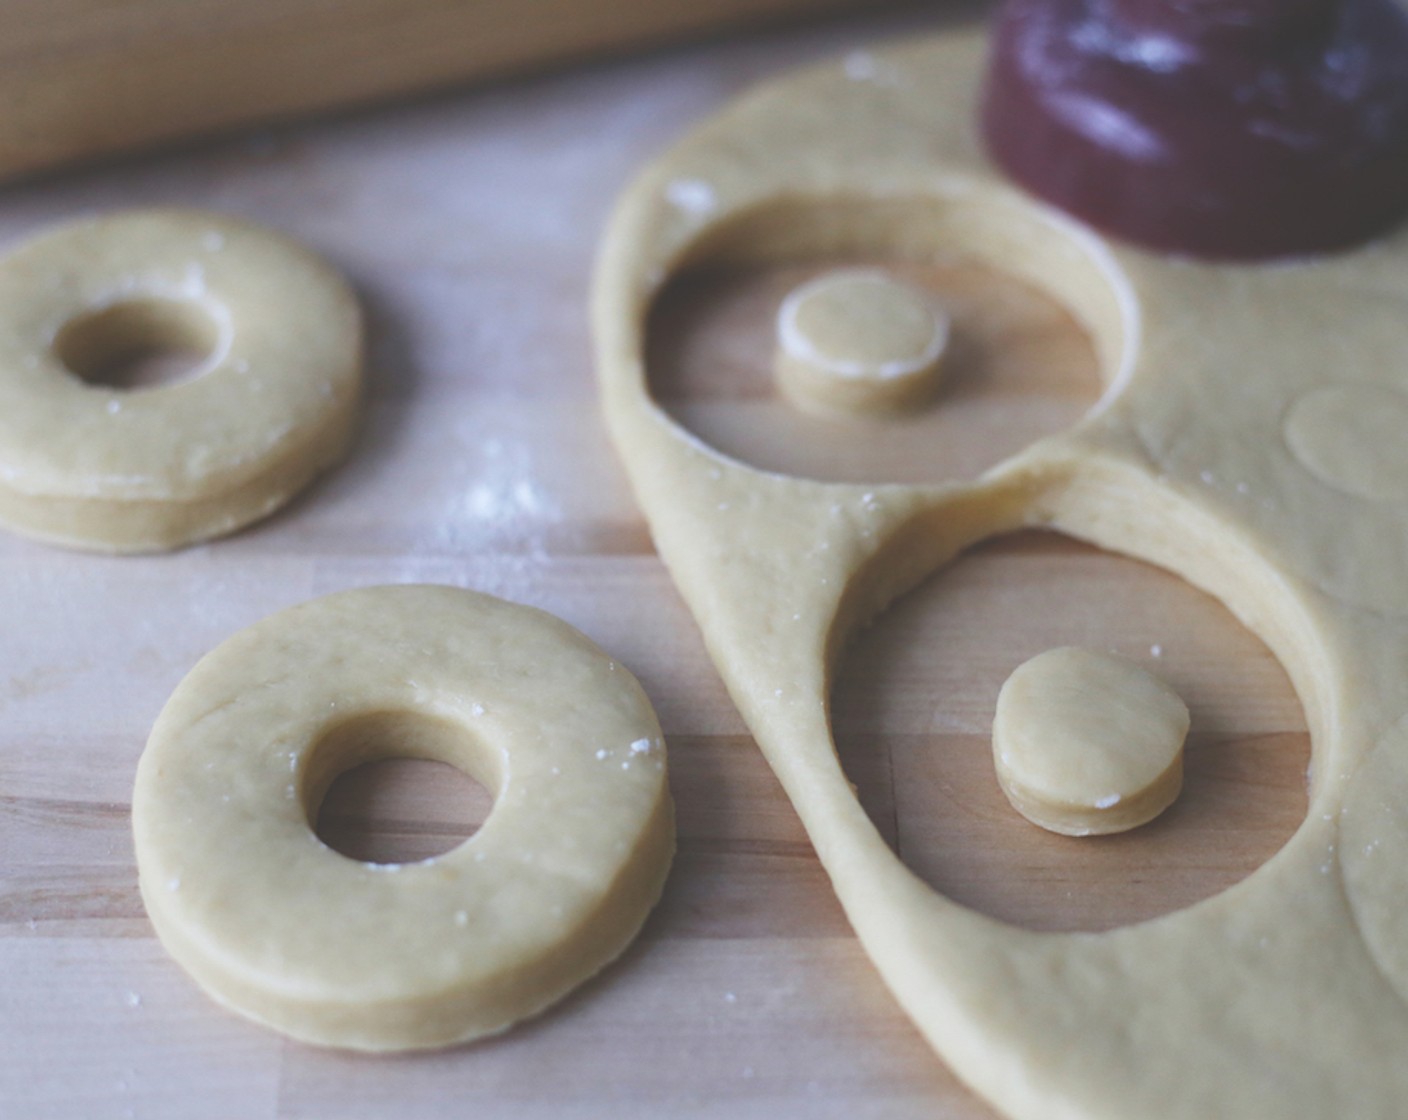 step 13 Using a doughnut cutter or round cookie cutter, cut out doughnuts and place on a lined baking tray. If you have any leftover dough, re-roll and continue cutting if need be.